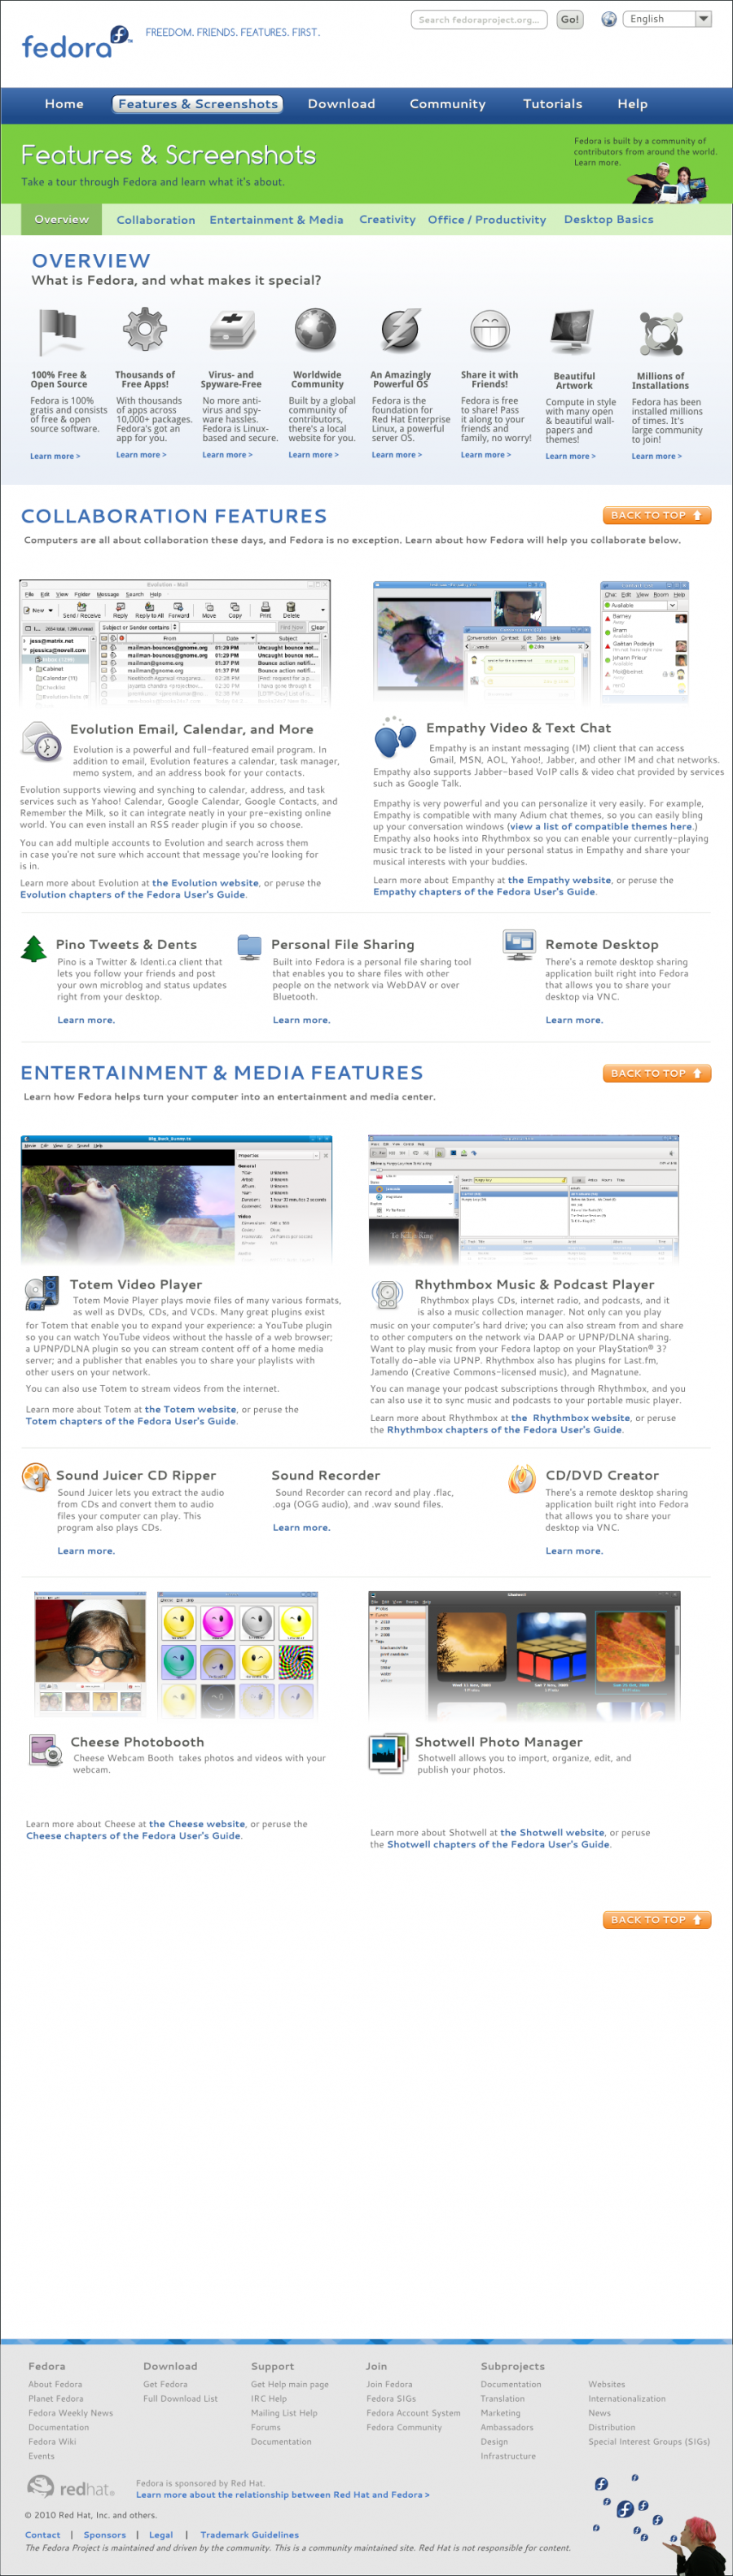 Wwwfpo-redesign-2010 1-features.png